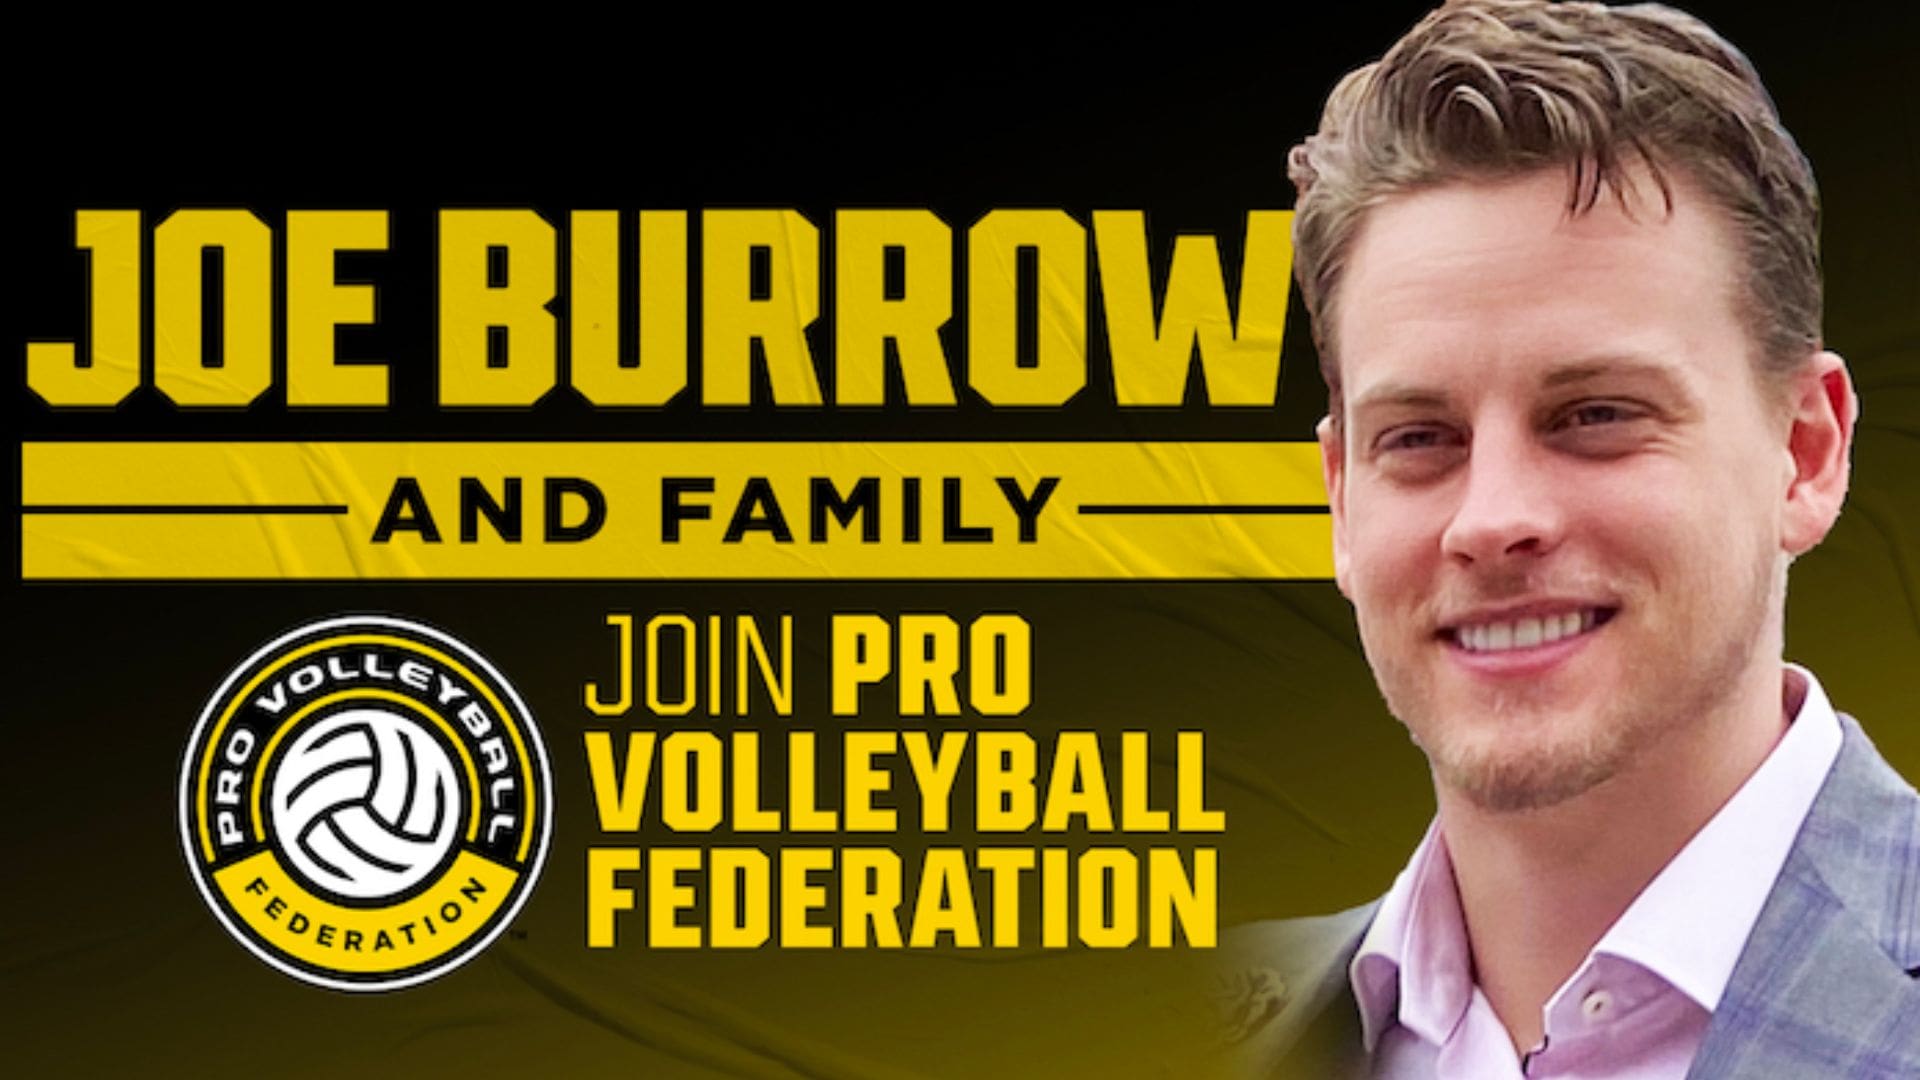 Joe Burrow Becomes Investor & Partner in Pro Volleyball Federation